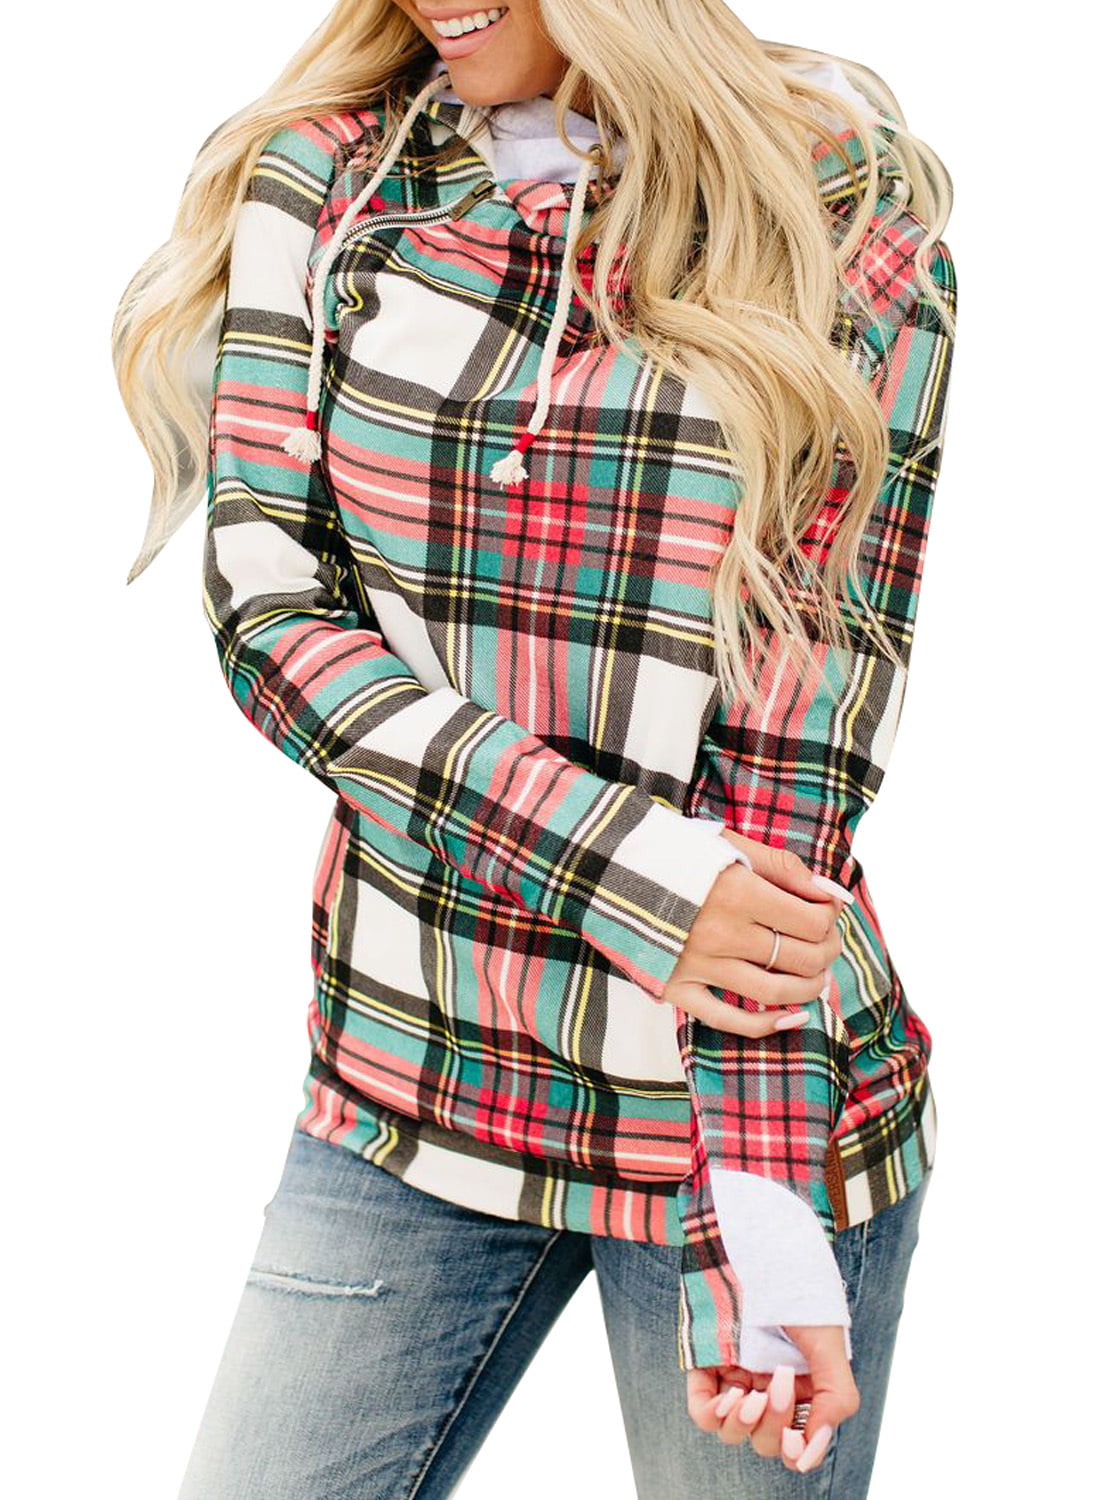 POTO Womens Long Sleeve Sweatshirt Plaid Patchwork Lightweight Hoodie Jackets Cowl Neck Fashion Tunic Pullover Sweaters 